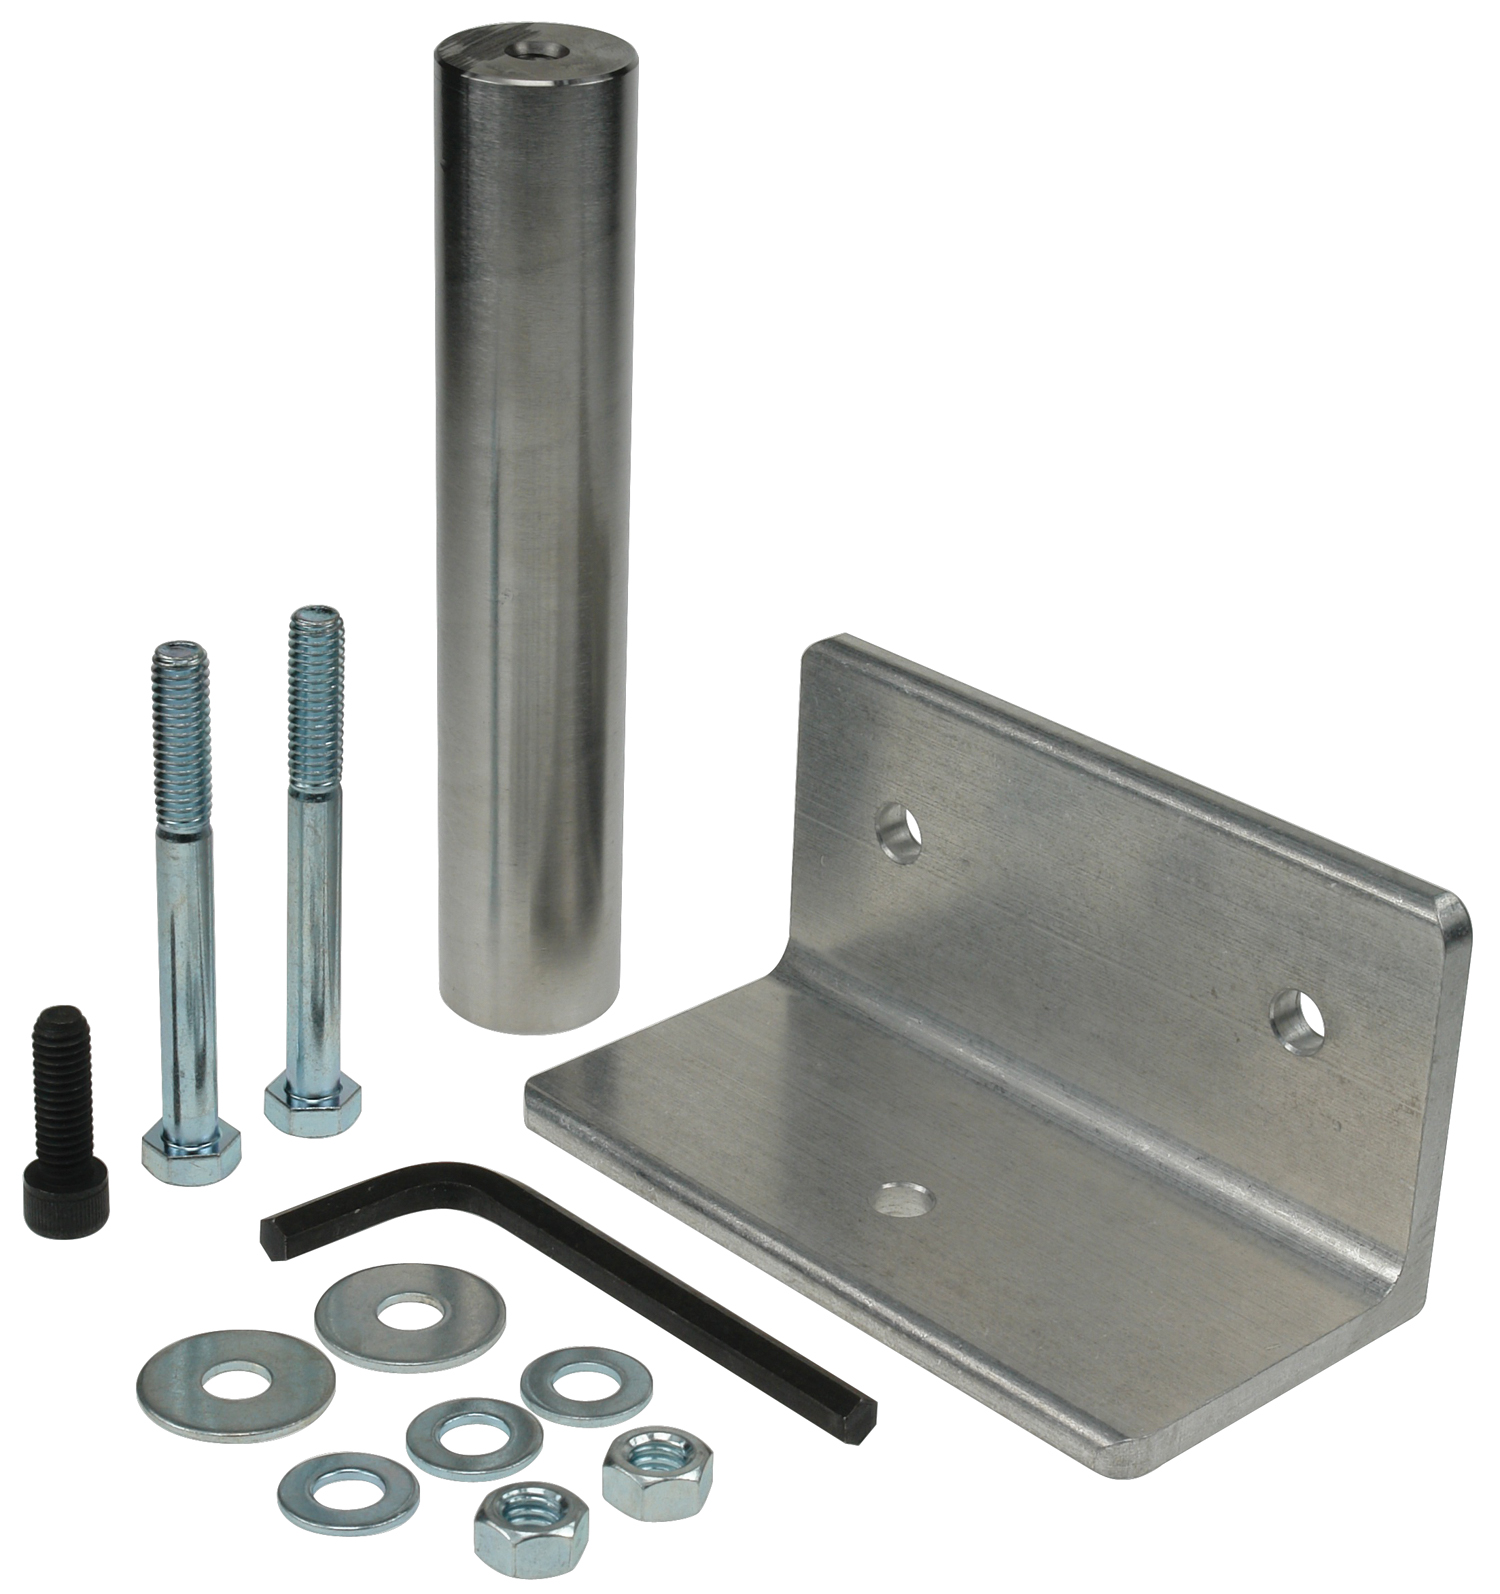 GRS mounting kit shelf for all GRS microscope stands